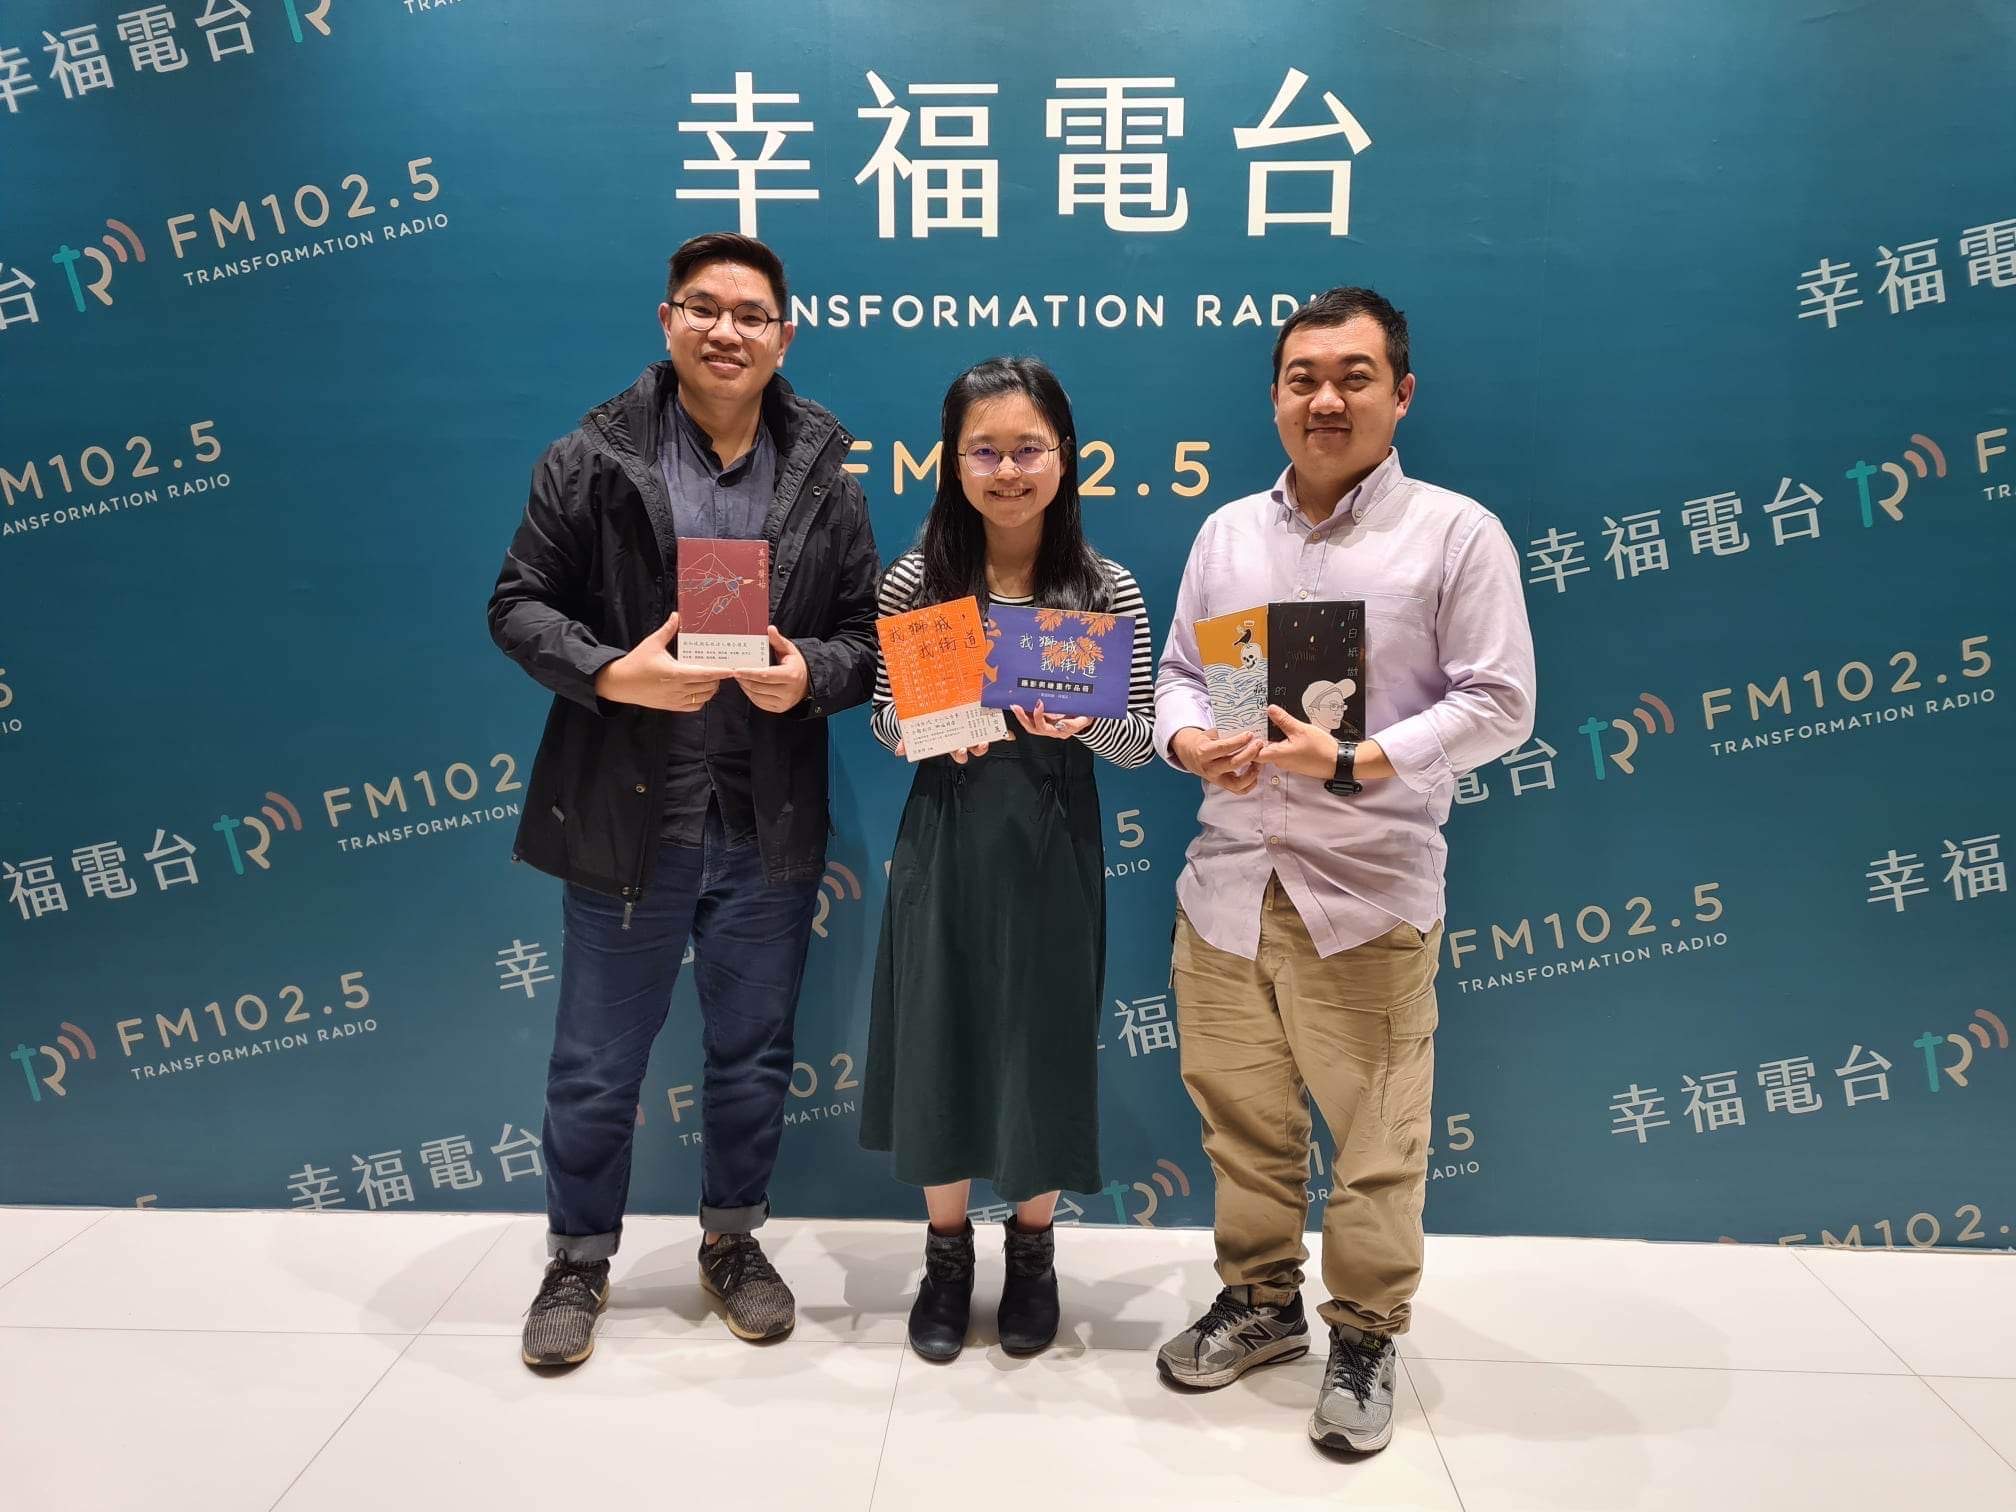 Jin Yong (first from right) and Andy Ang, co-founders of TrendLit Publishing after a radio interview with Transformation Radio 102.5. Image Credit: TrendLit Publishing